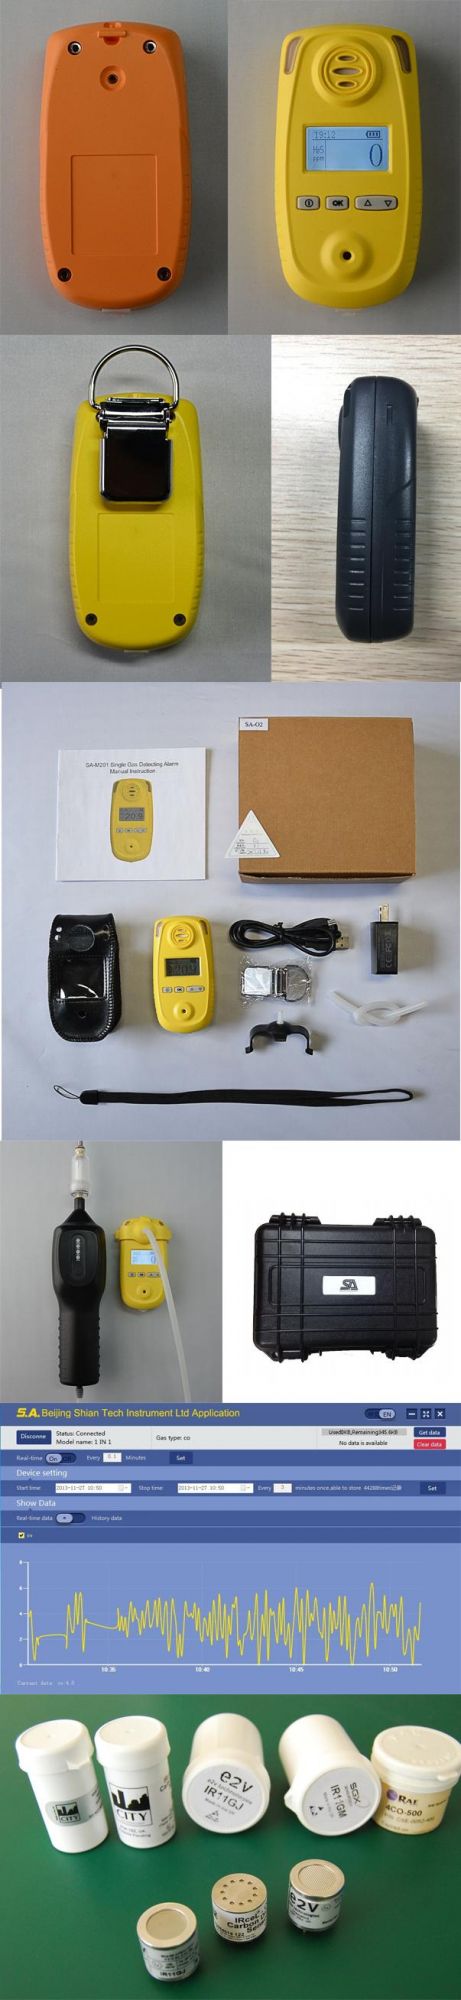 Portable No2 Gas Detector for Personal Safety Used in Thermal Power Station